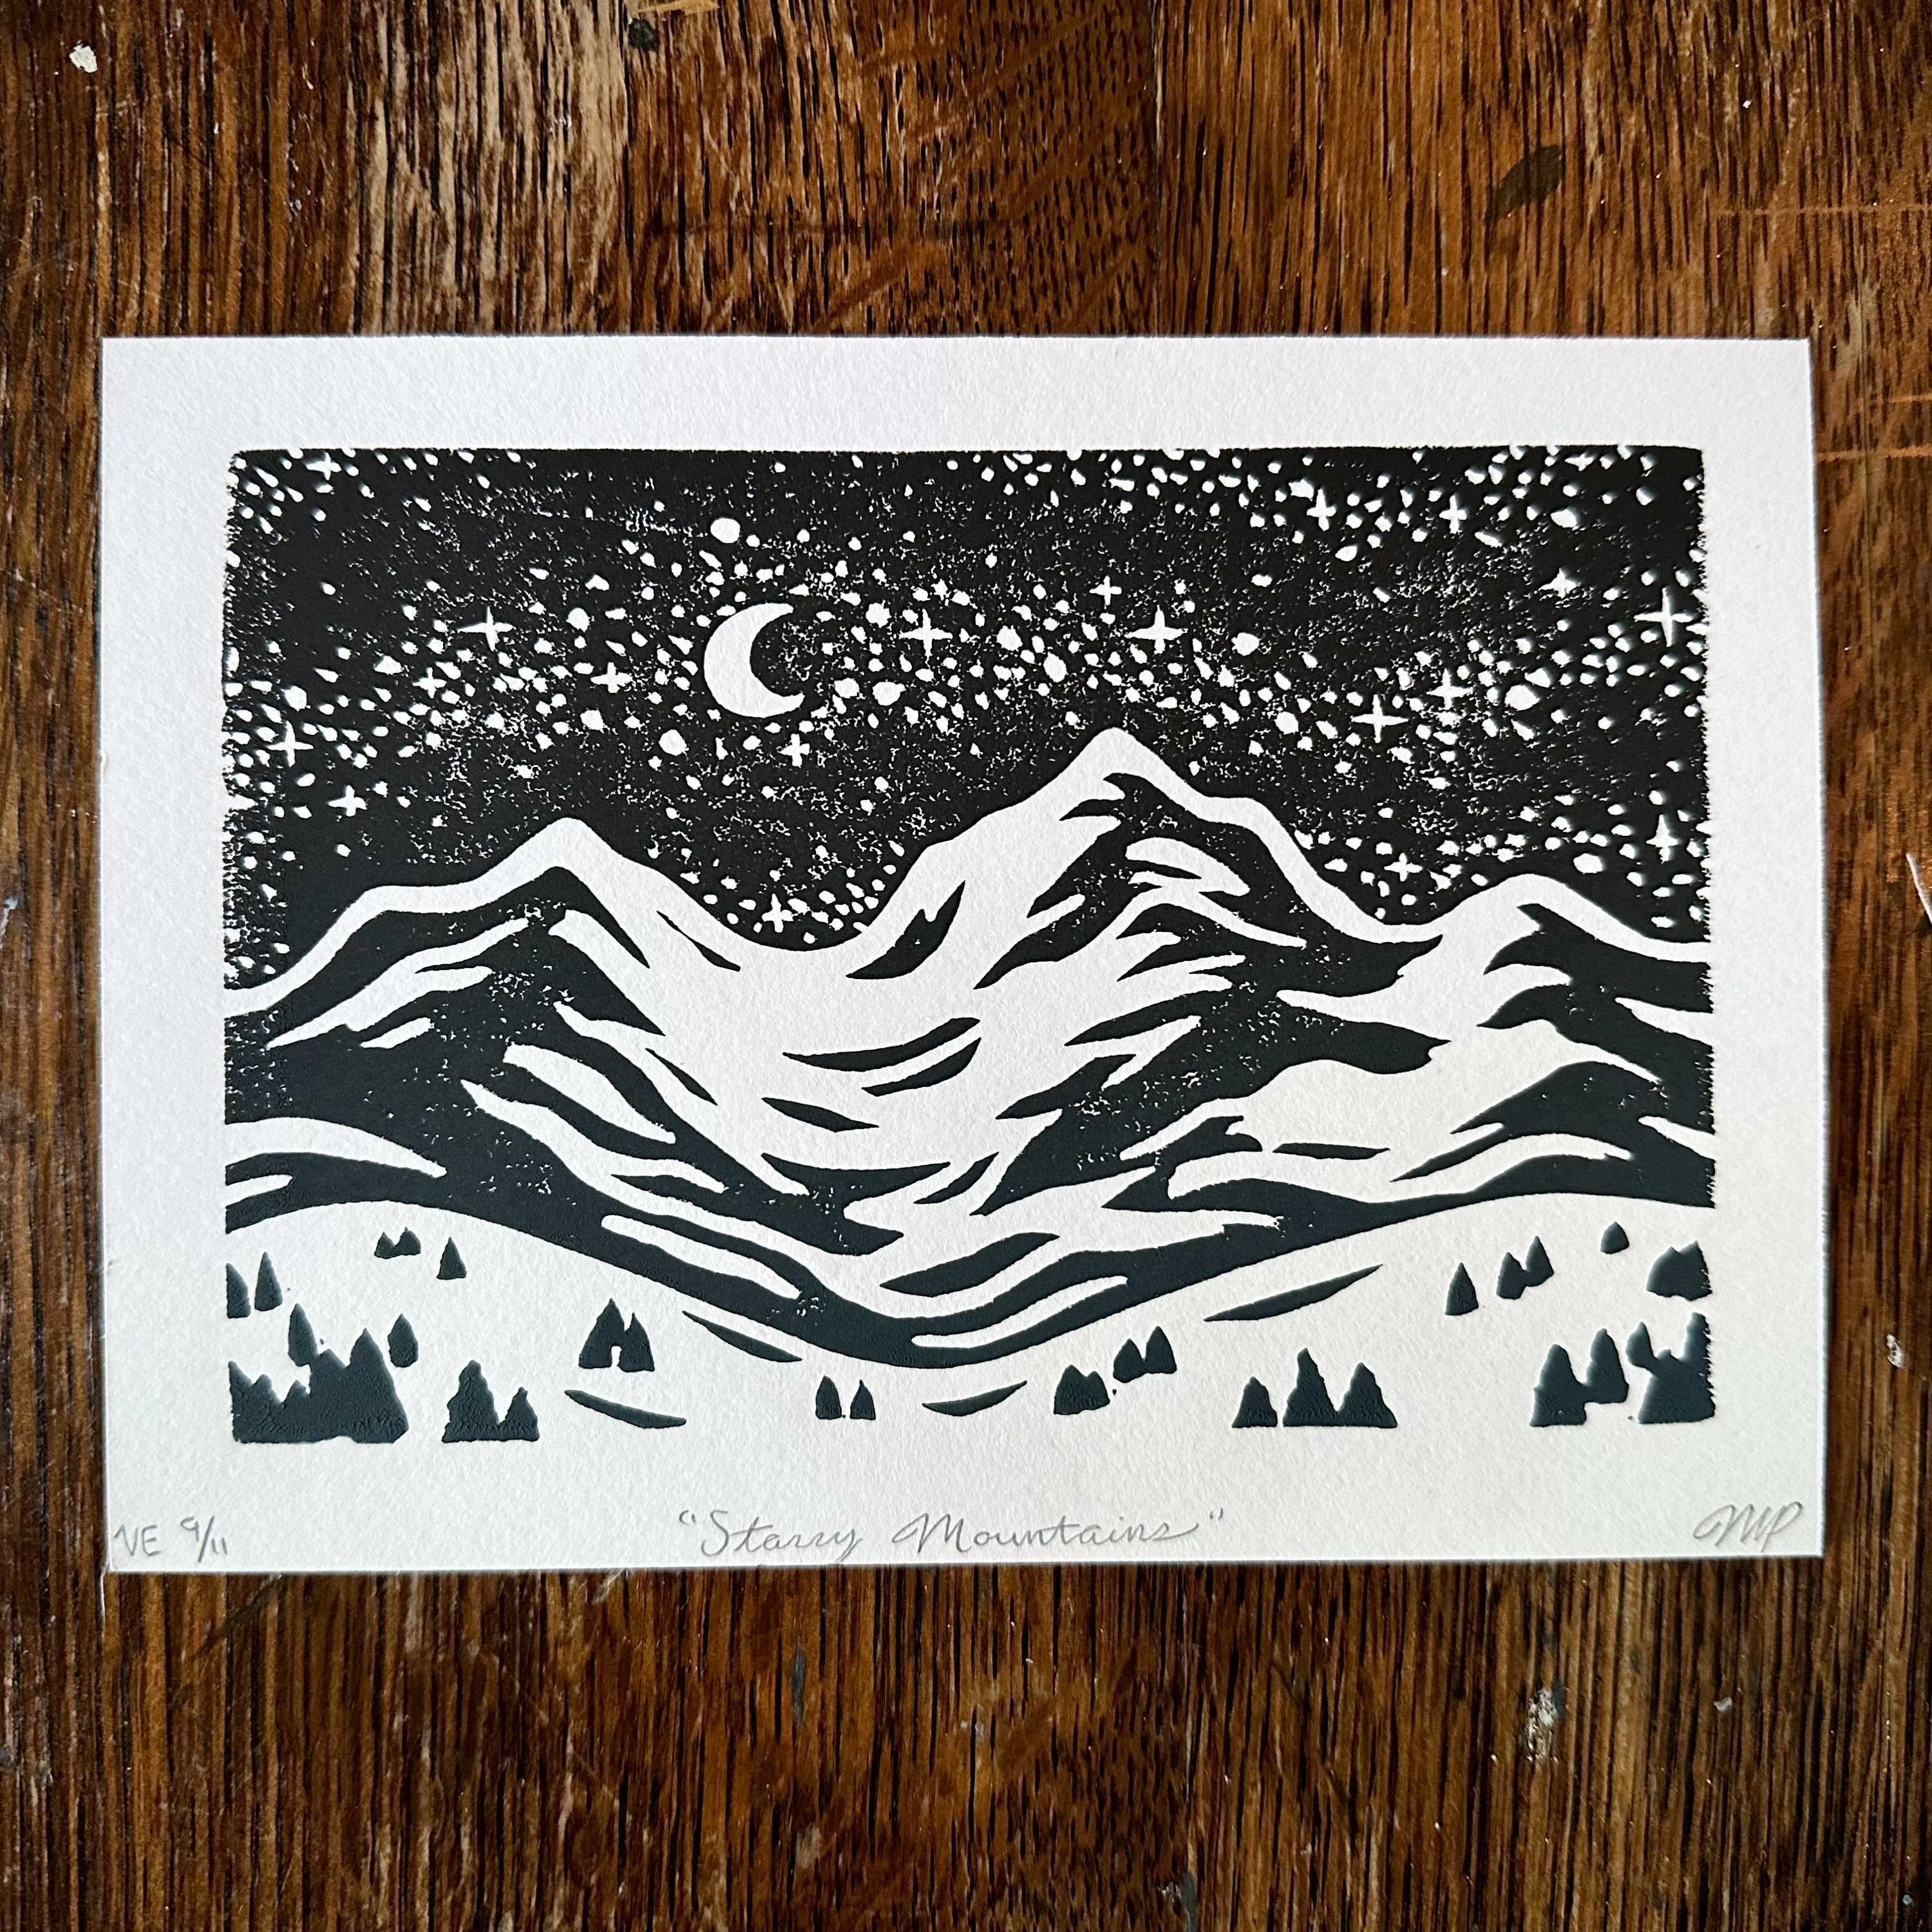 Very Scary - 5 x 7 inch unframed linocut block print, edition of 16